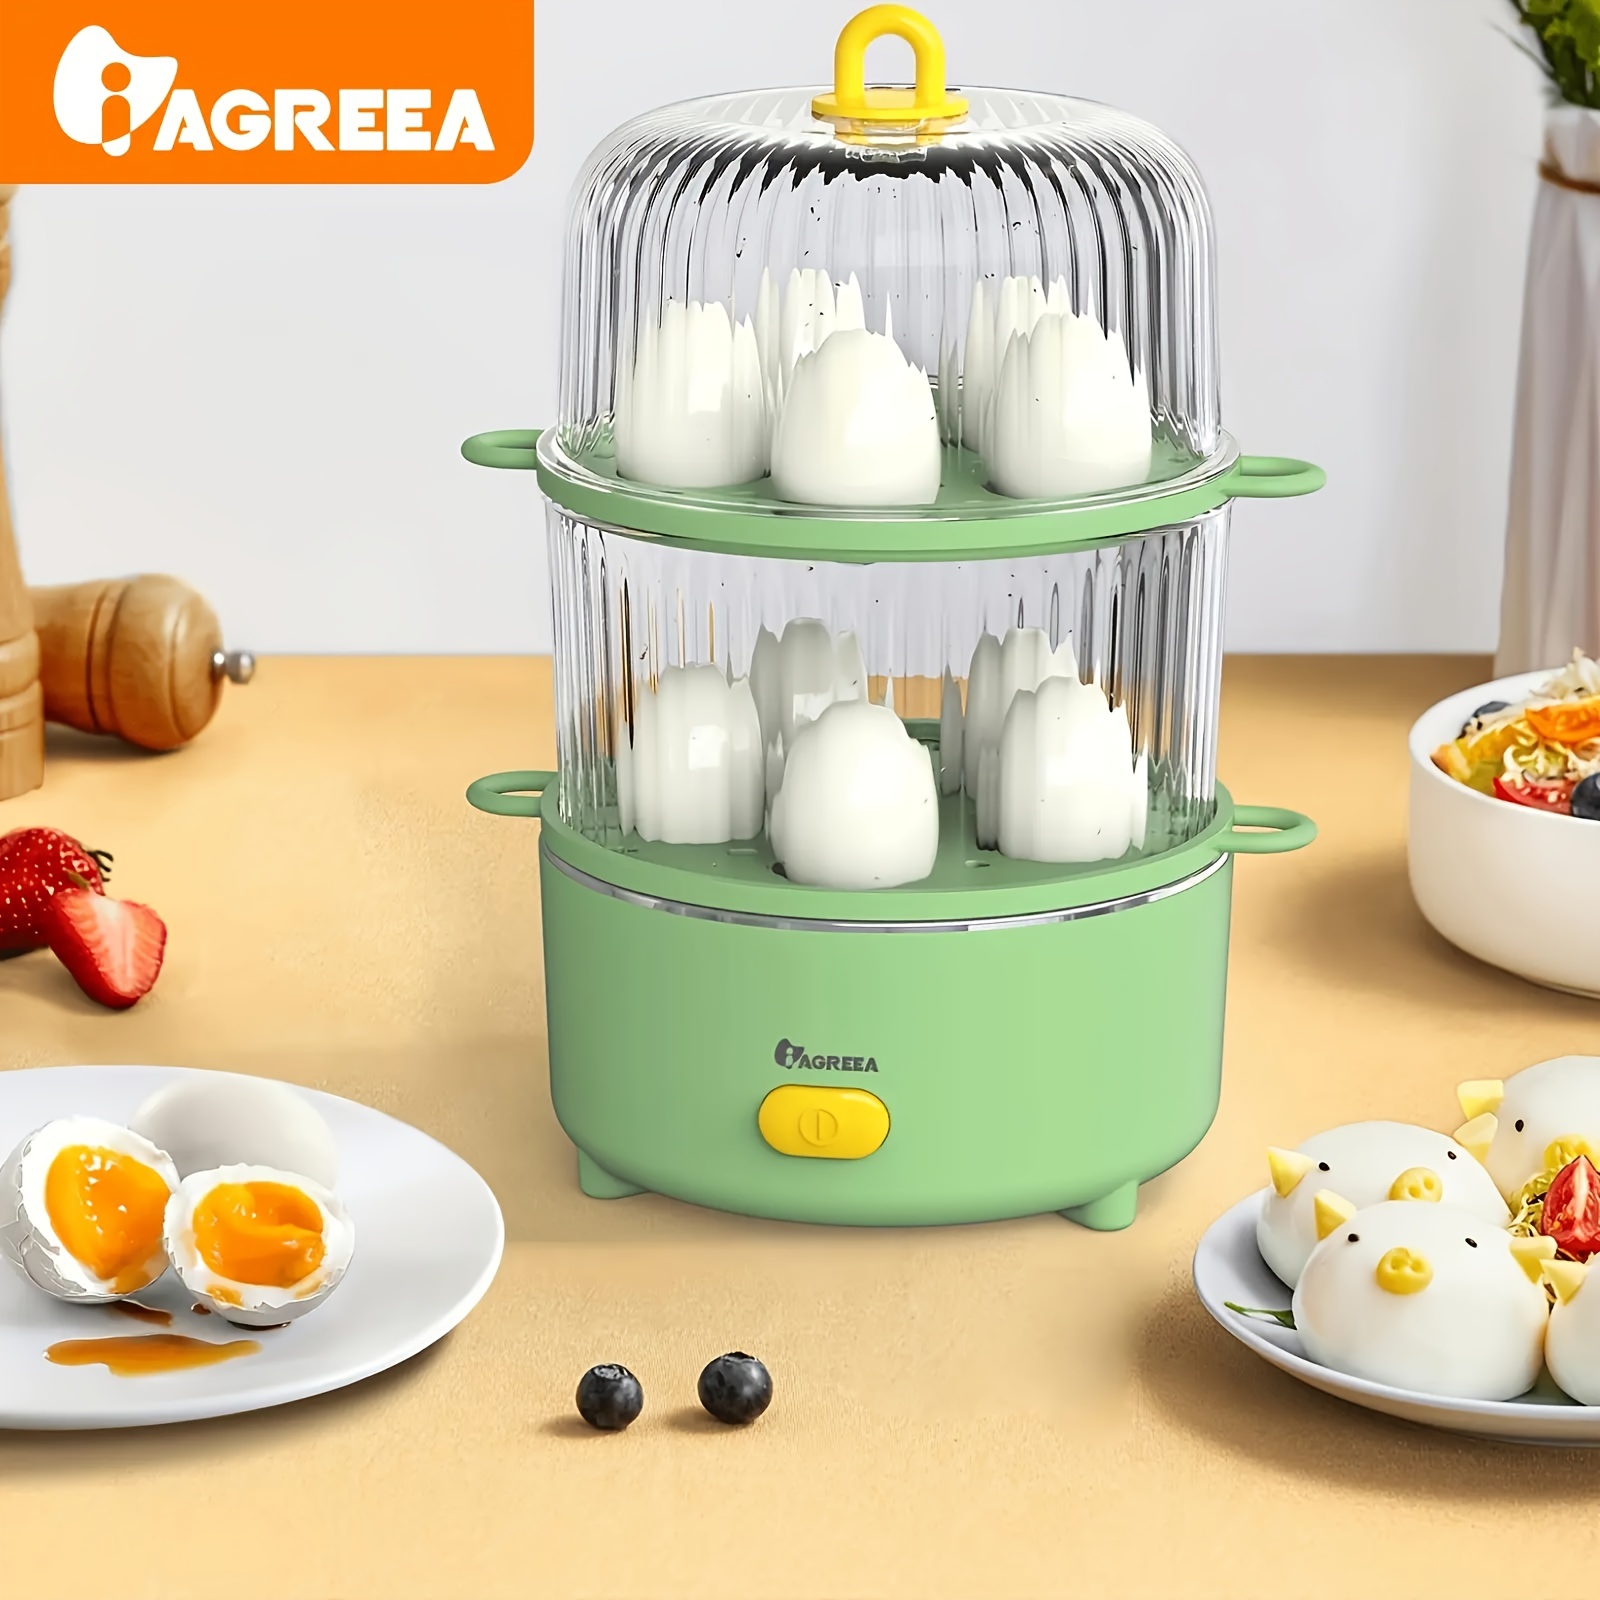 Aqwzh Rapid Egg Cooker Electric for Hard Boiled, Poached, Scrambled Eggs,  Omelets, Steamed Vegetables, Seafood, Dumplings, 7 capacity, with Auto Shut